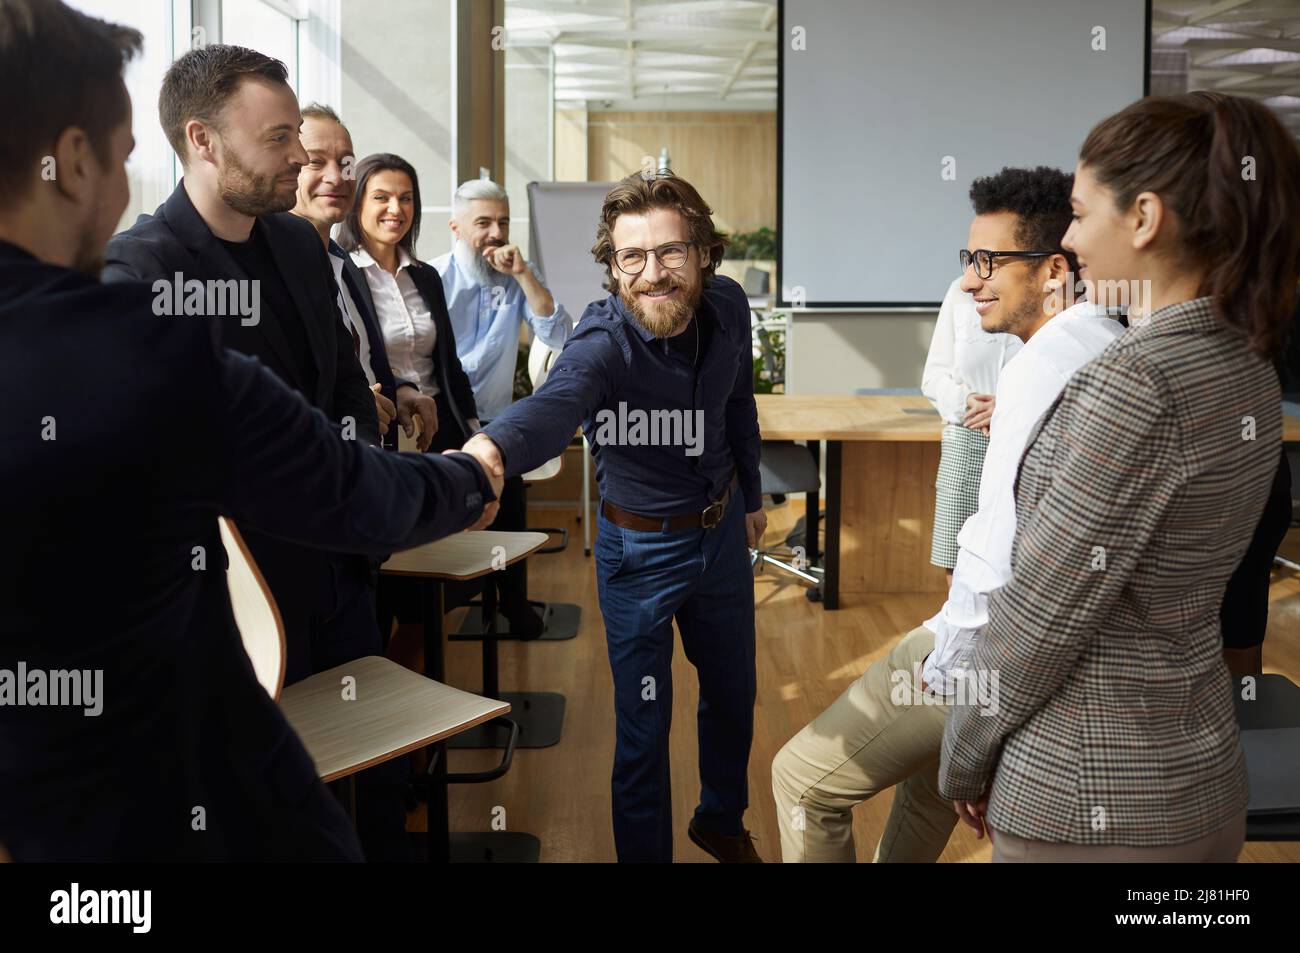 Friendly male colleagues shake hands during workplace meeting in modern coworking office. Stock Photo